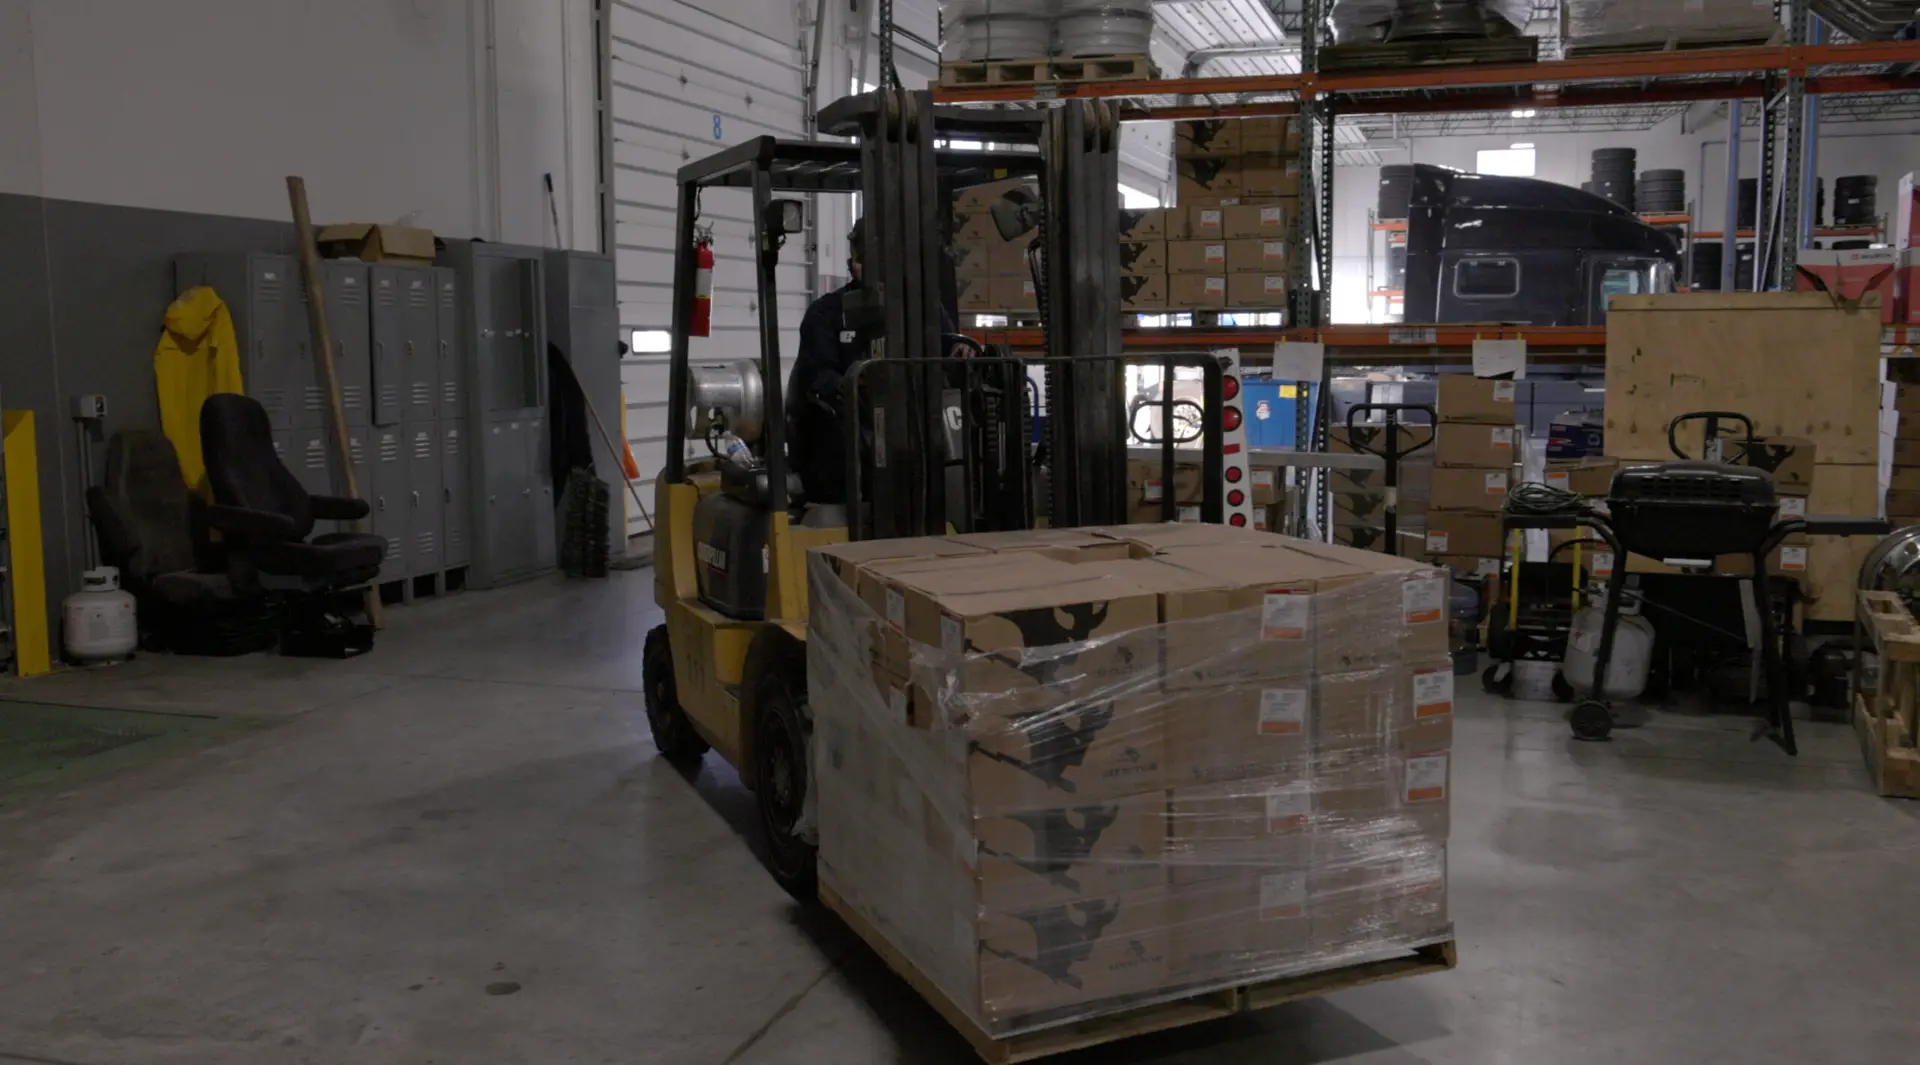 forklift, boxes, warehouse, chair